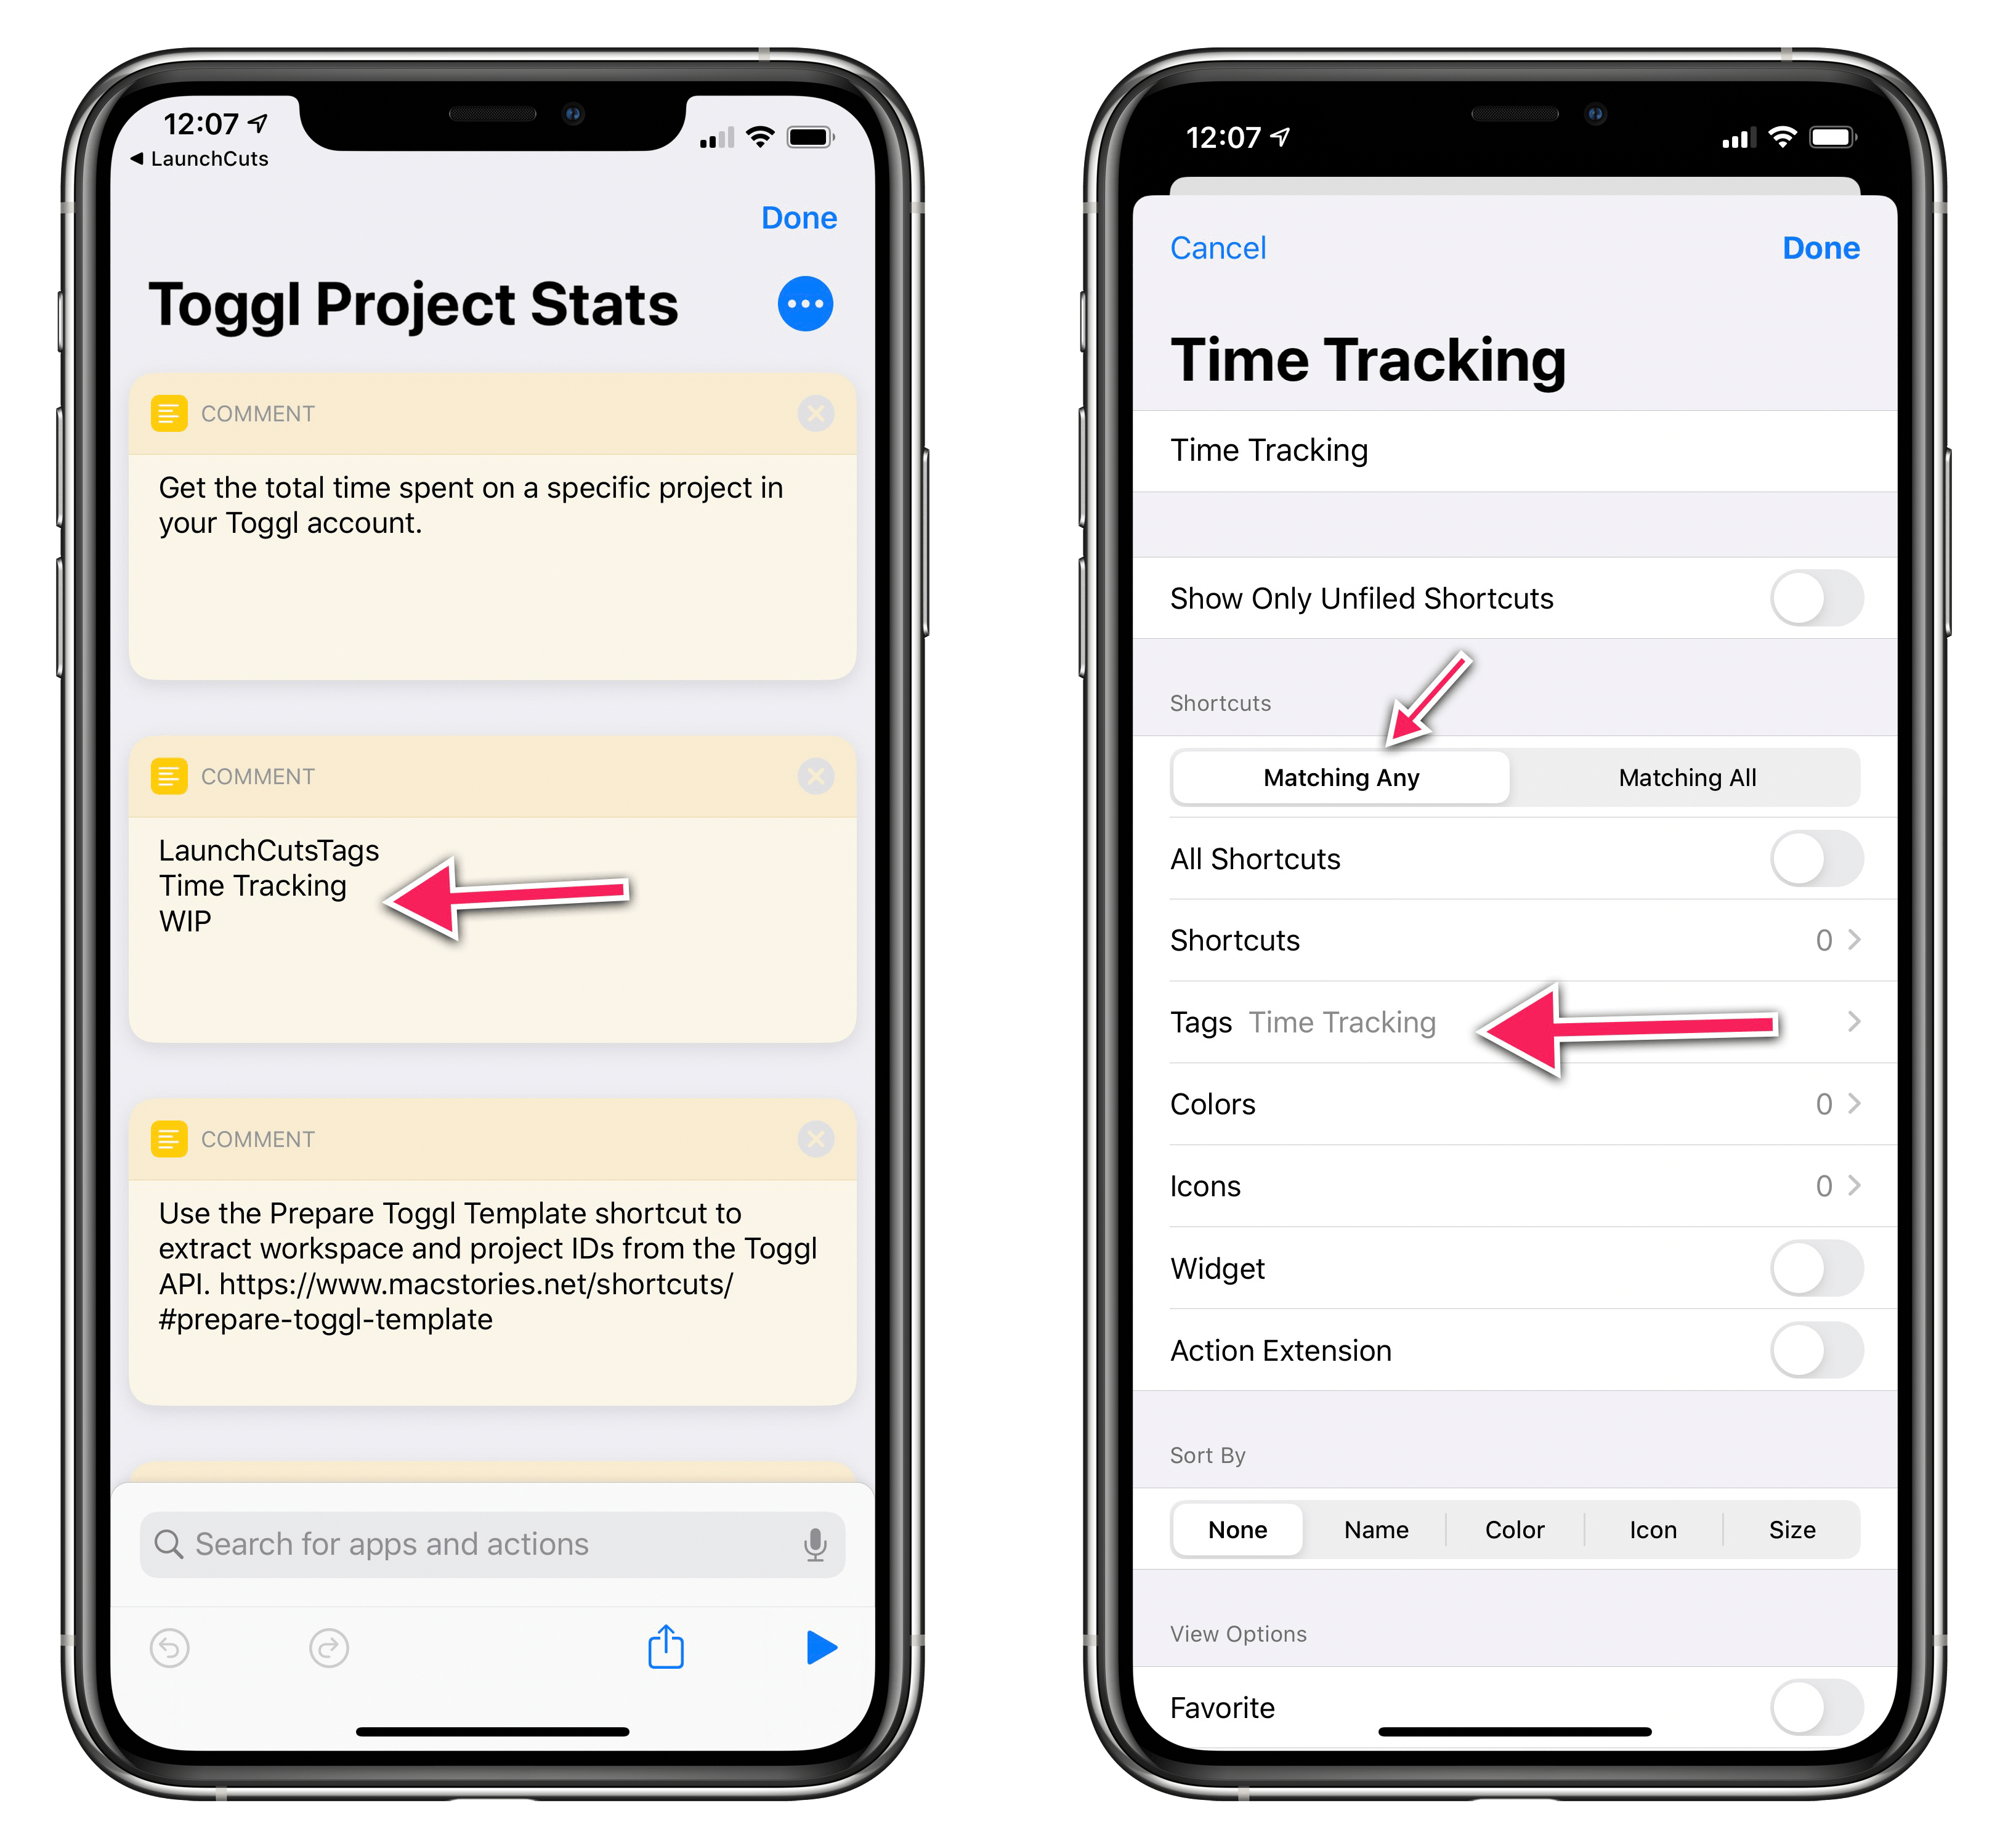 Smart folders in LaunchCuts are based on tags you add to your shortcuts.